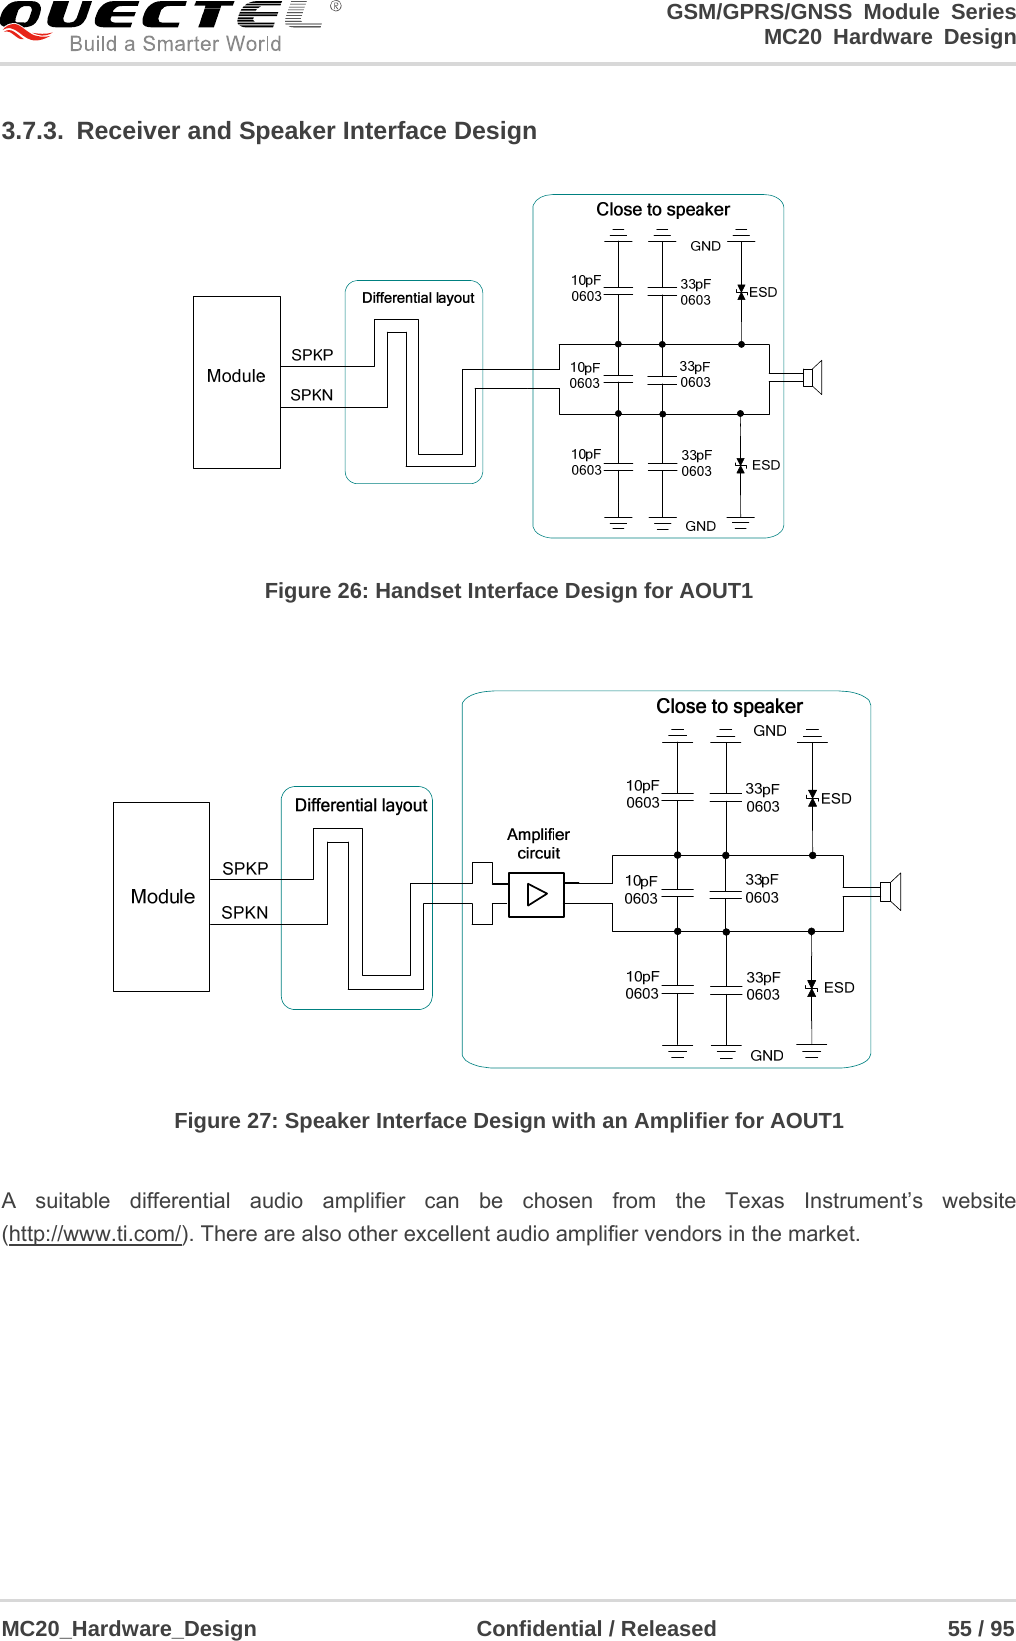                                                                     GSM/GPRS/GNSS Module Series                                                                 MC20 Hardware Design  MC20_Hardware_Design                    Confidential / Released                     55 / 95     3.7.3.  Receiver and Speaker Interface Design  Figure 26: Handset Interface Design for AOUT1   Figure 27: Speaker Interface Design with an Amplifier for AOUT1  A suitable differential audio amplifier can be chosen from the Texas Instrument’s website (http://www.ti.com/). There are also other excellent audio amplifier vendors in the market.    